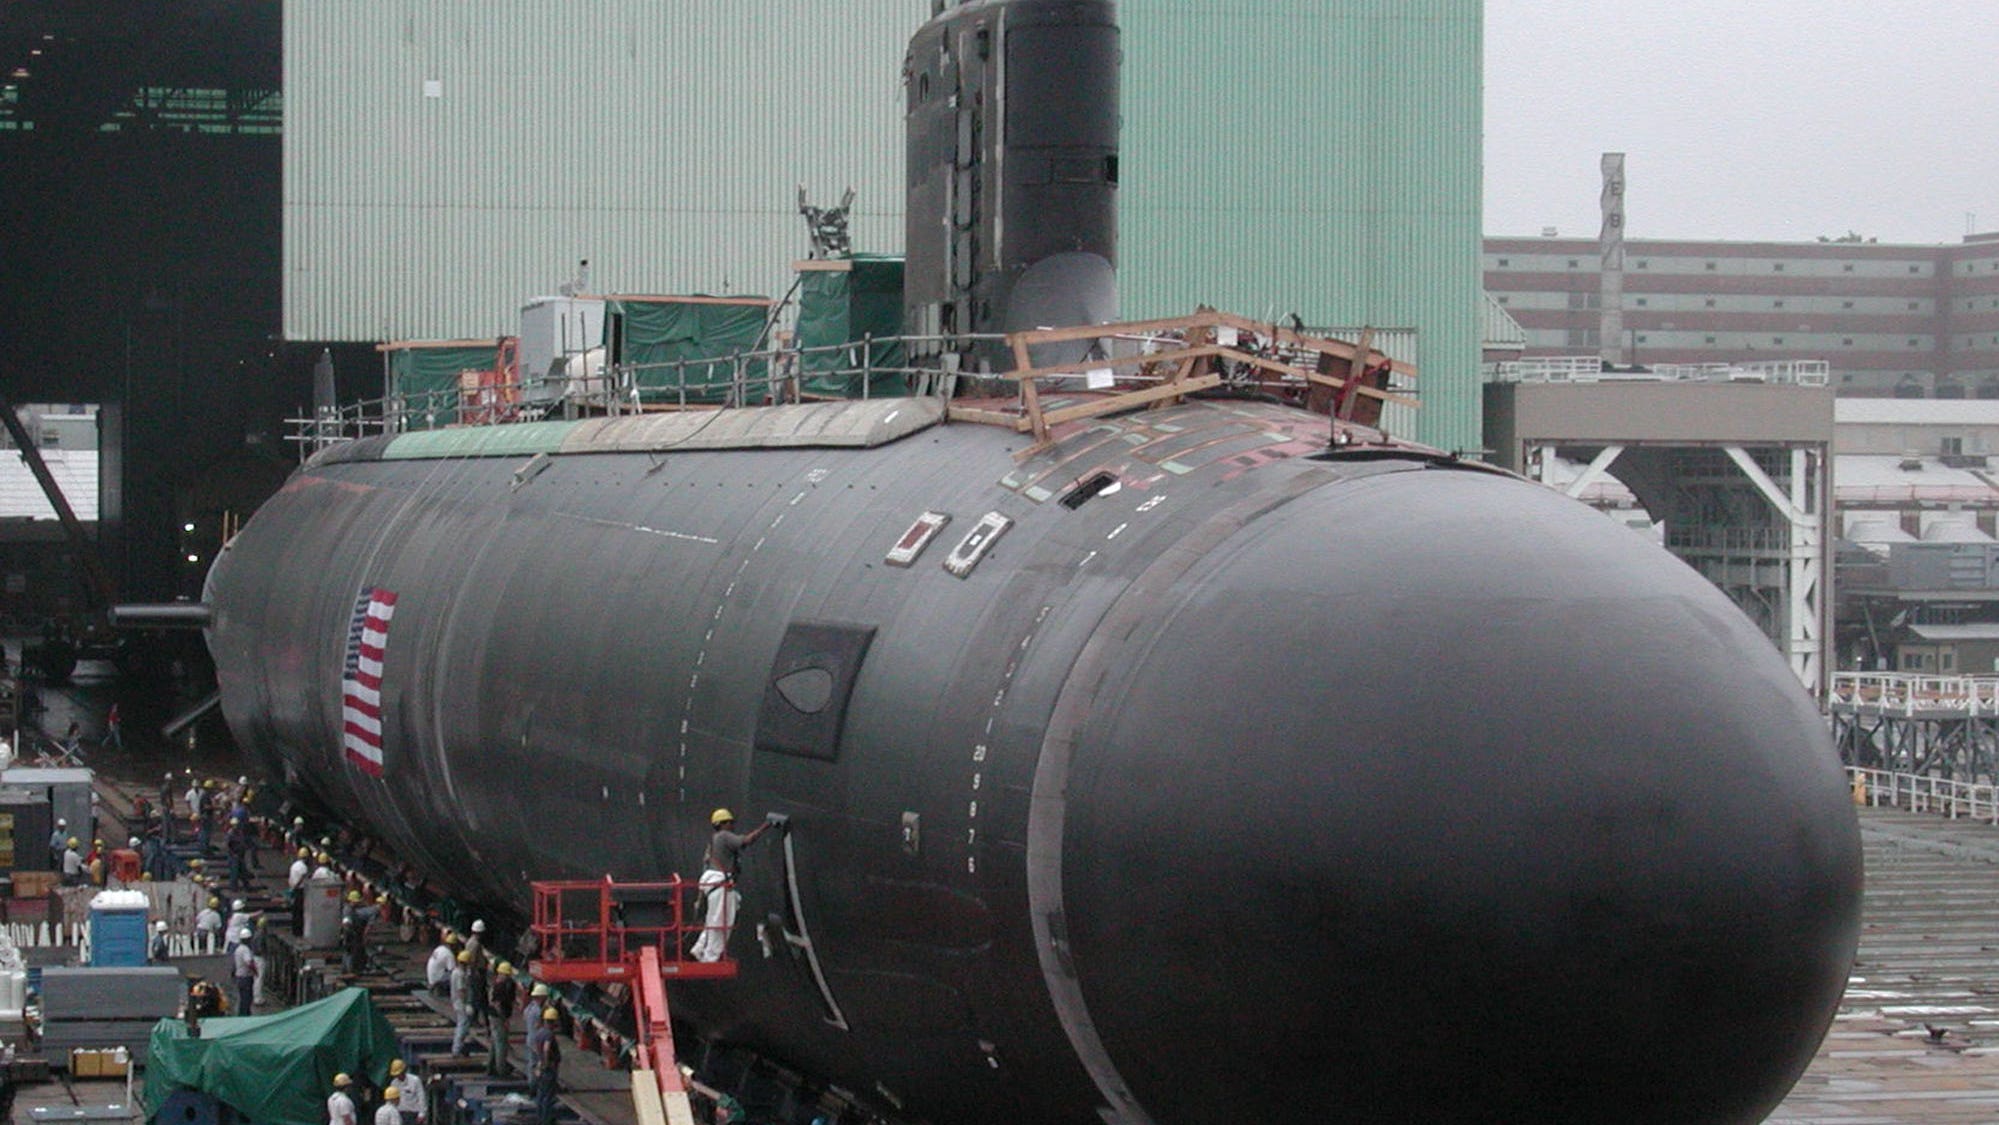 The Navy's newest and most advanced nuclear attack submarine, Virginia (SSN-774), is moved outdoors for the first time Saturday, Aug. 2, 2003, at the General Dynamics Electric Boat shipyard in Groton, Conn. The Virginia will be christened at a shipyard ceremony Saturday, Aug. 16. (AP Photo/Carol Phelps) ORG XMIT: CTCP102